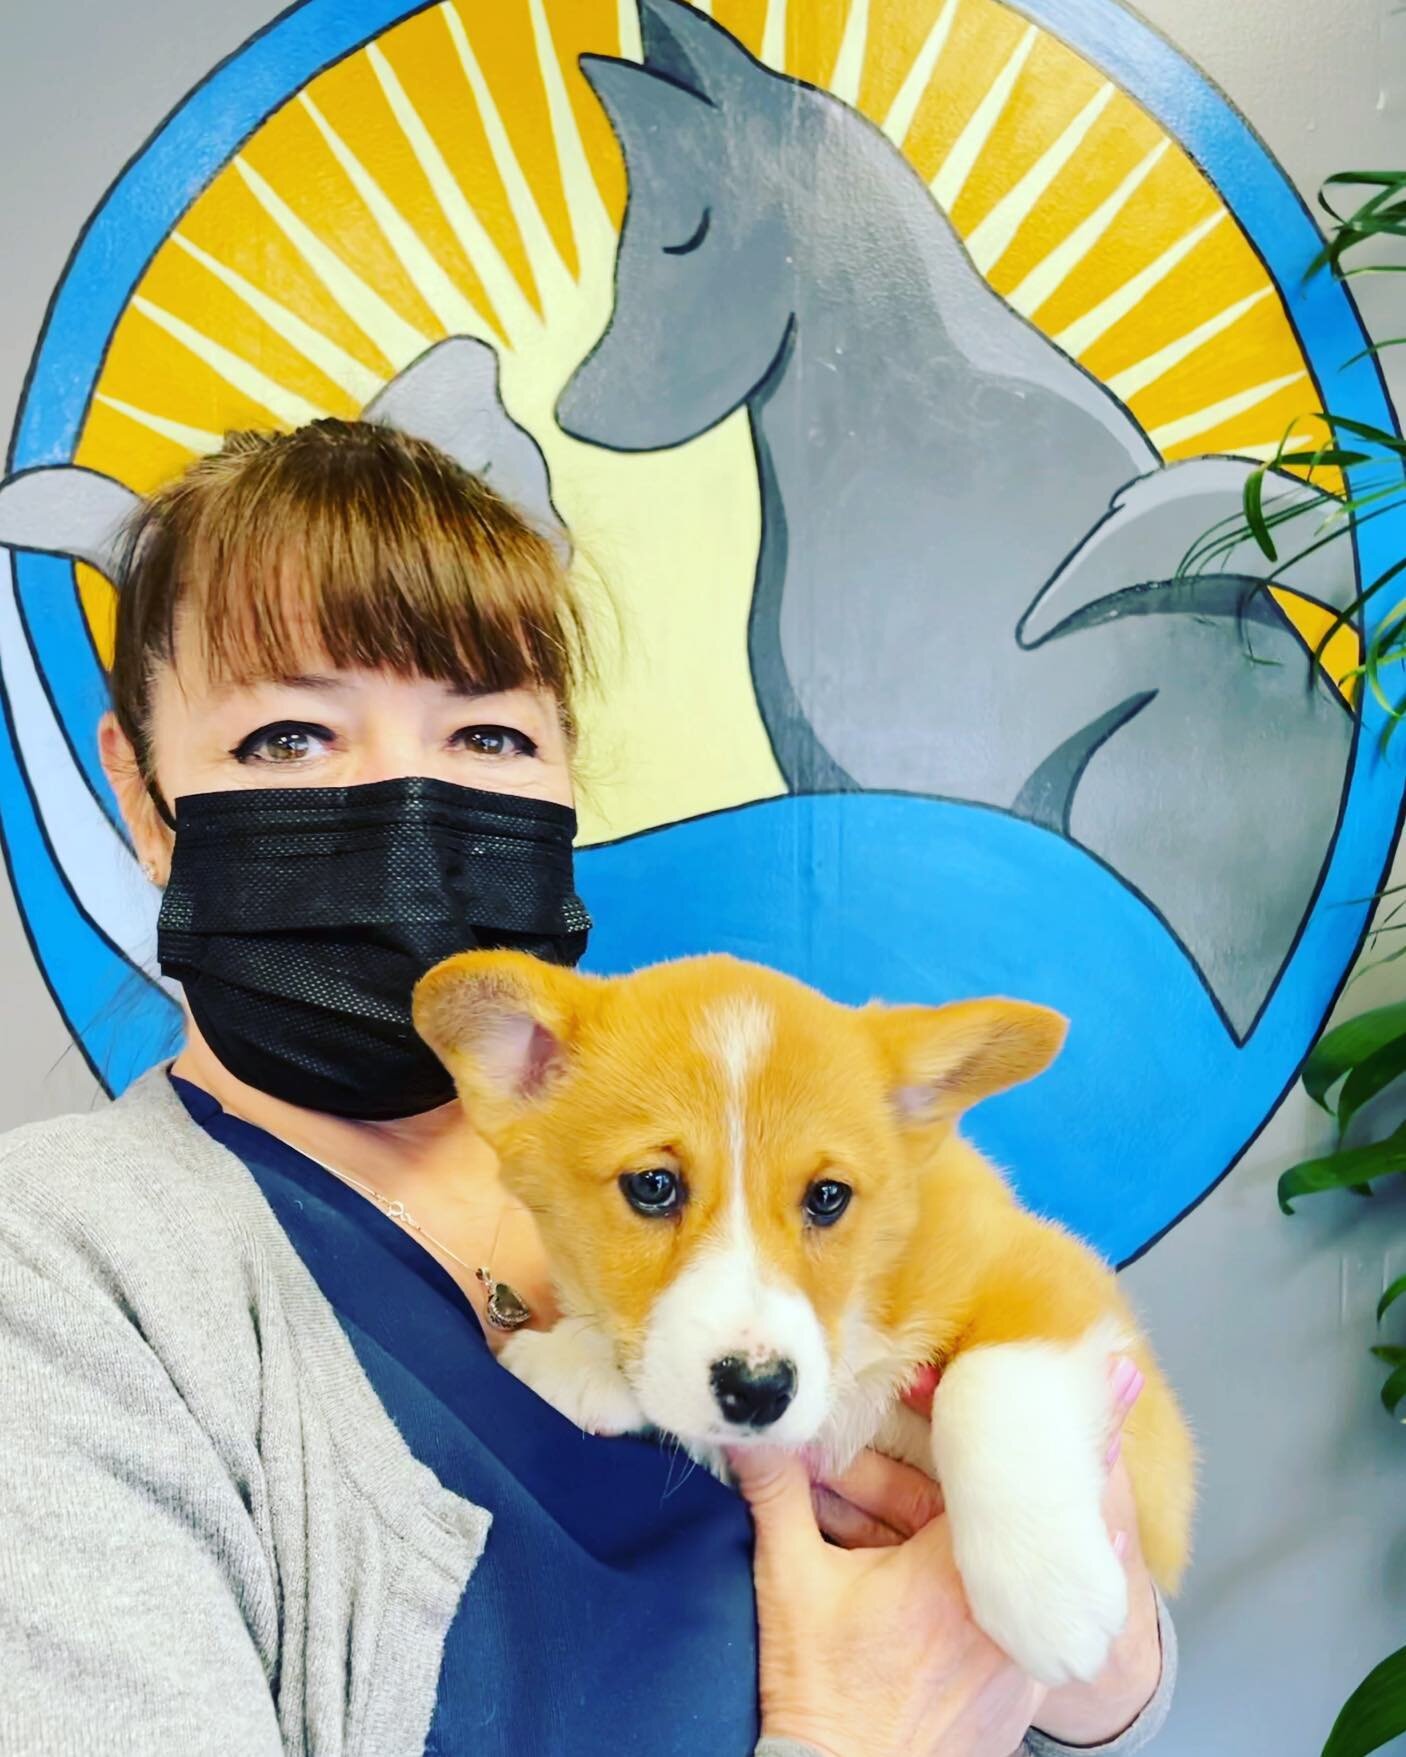 The cutest patient of the morning 🥰🥰 in for a healthy, new puppy exam! 

#puppiesofinstagram #riversvet #rvuc #pittsburghvet #veterinarian #welovepuppies #corgi #corgibaby #